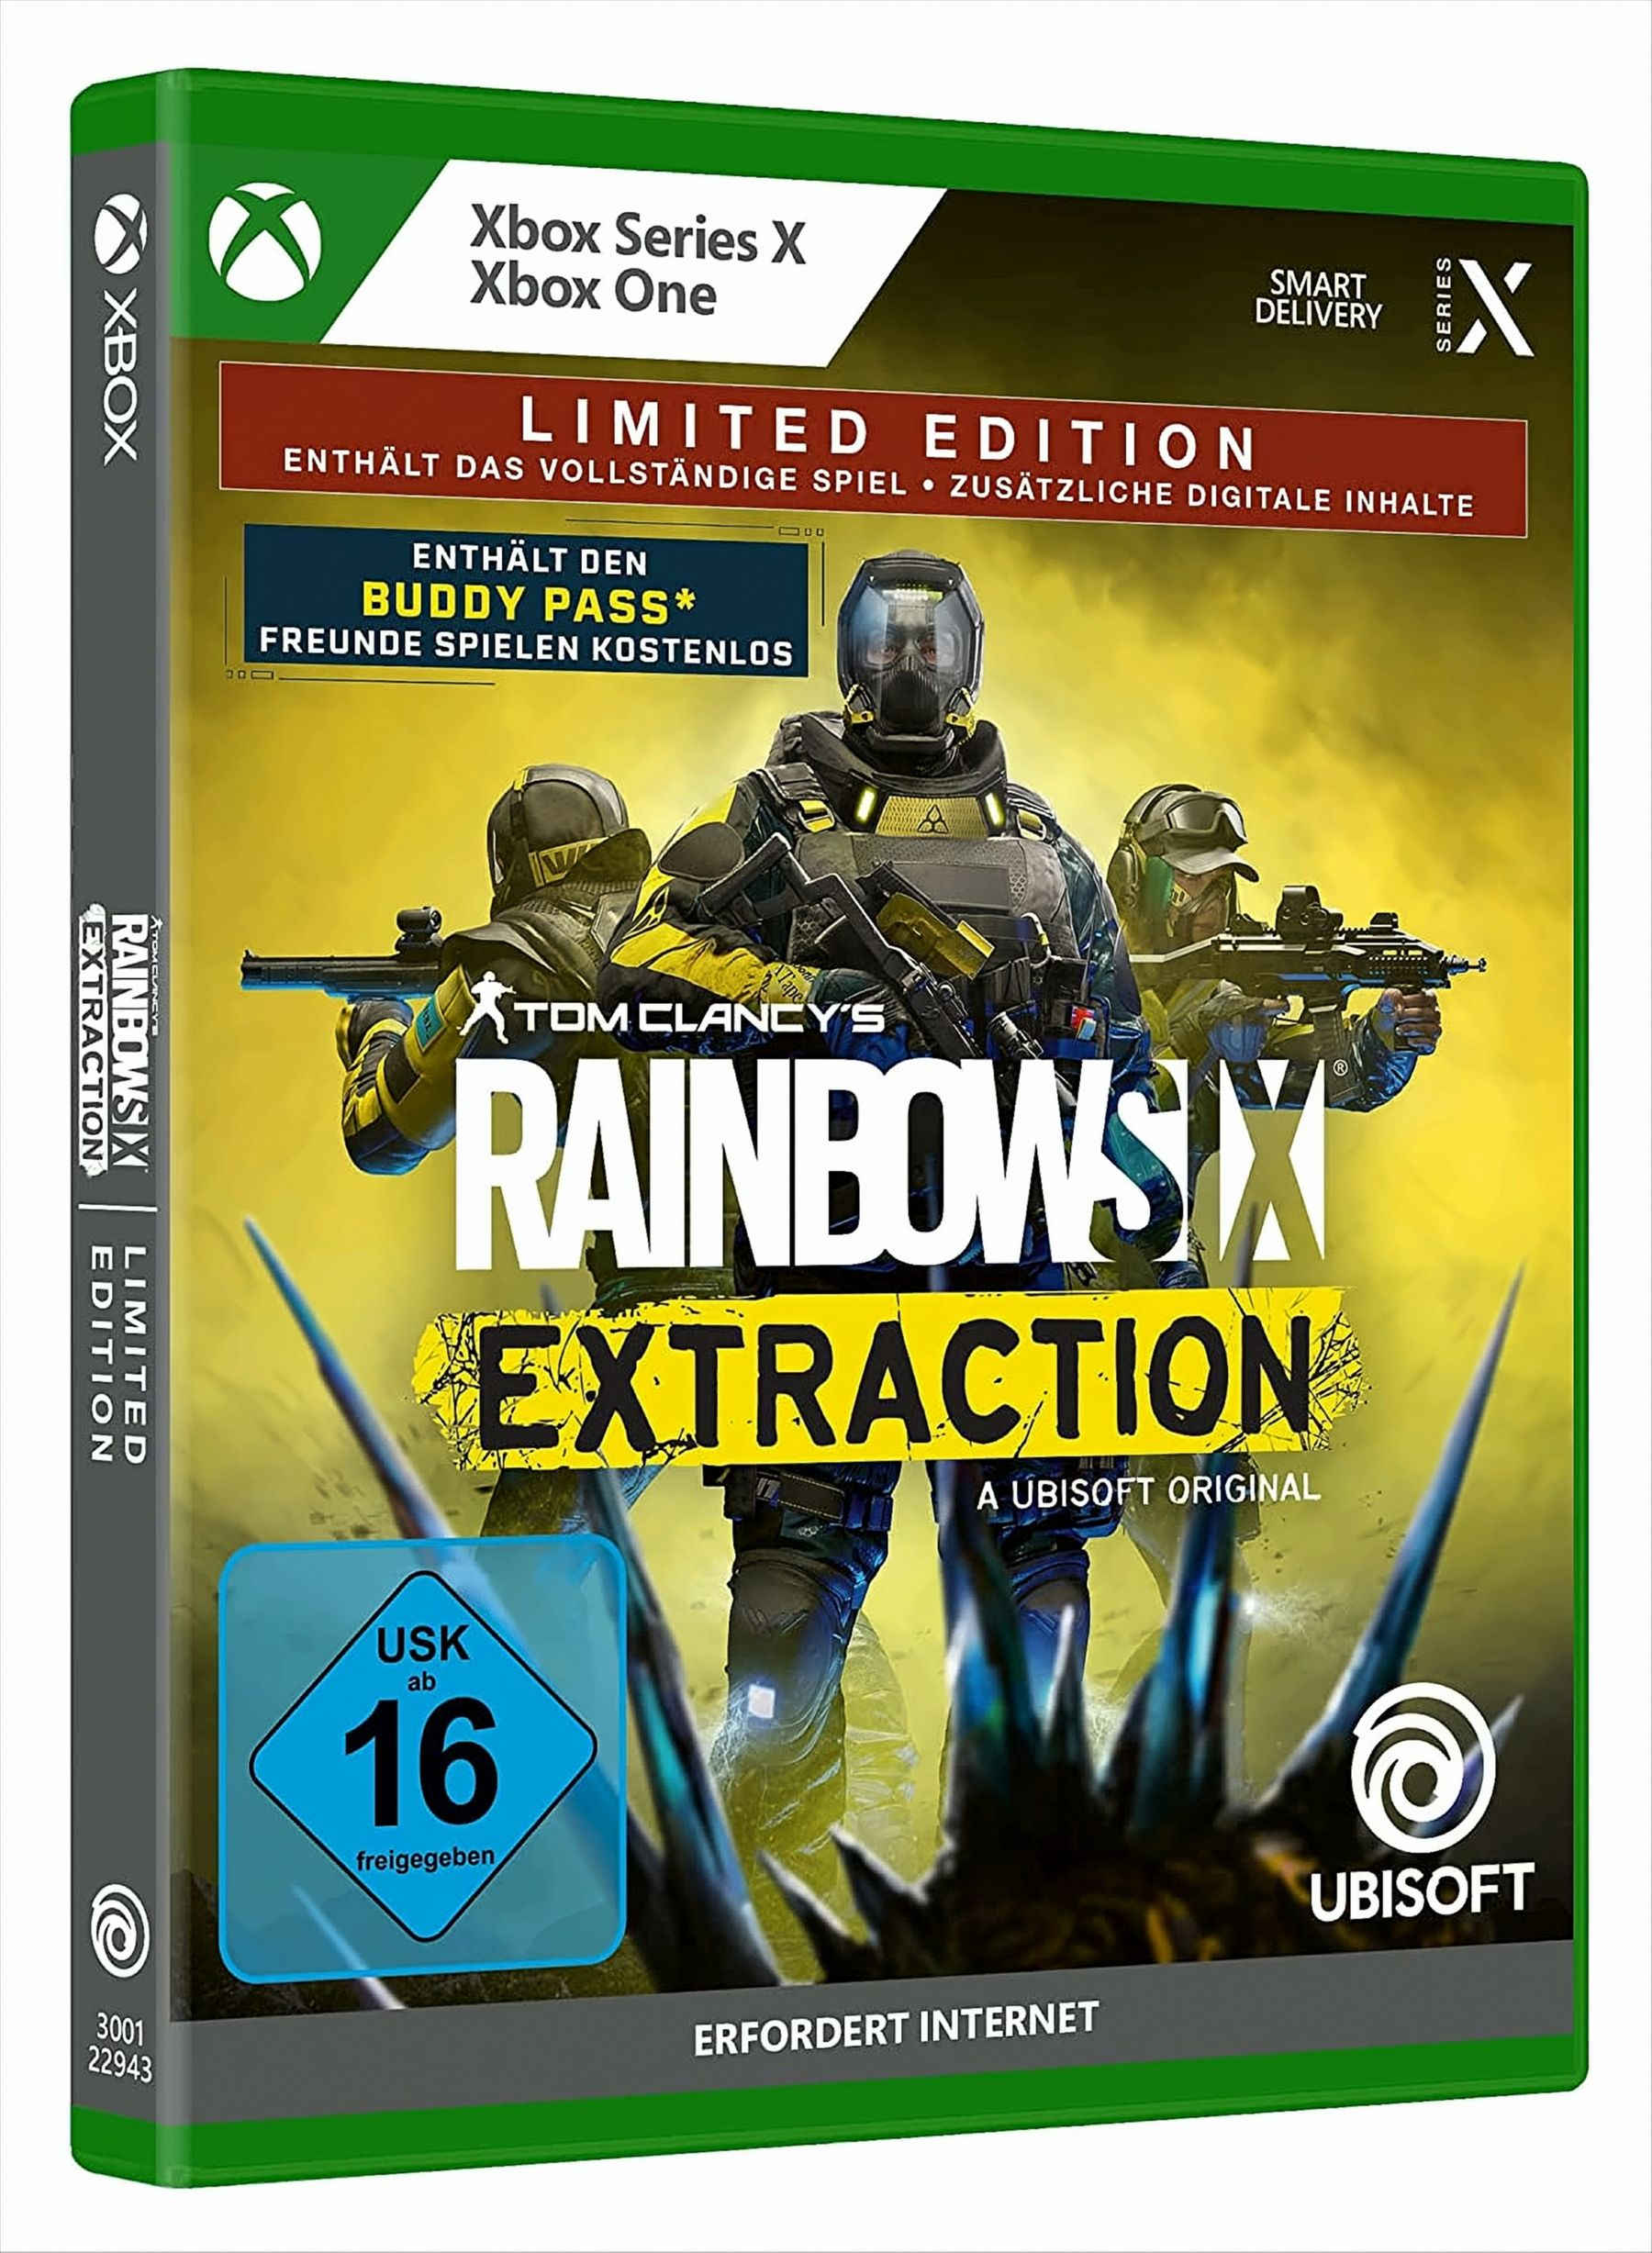 Series [Xbox X|S] Extractions Rainbow Limited Edition Six XBSX -